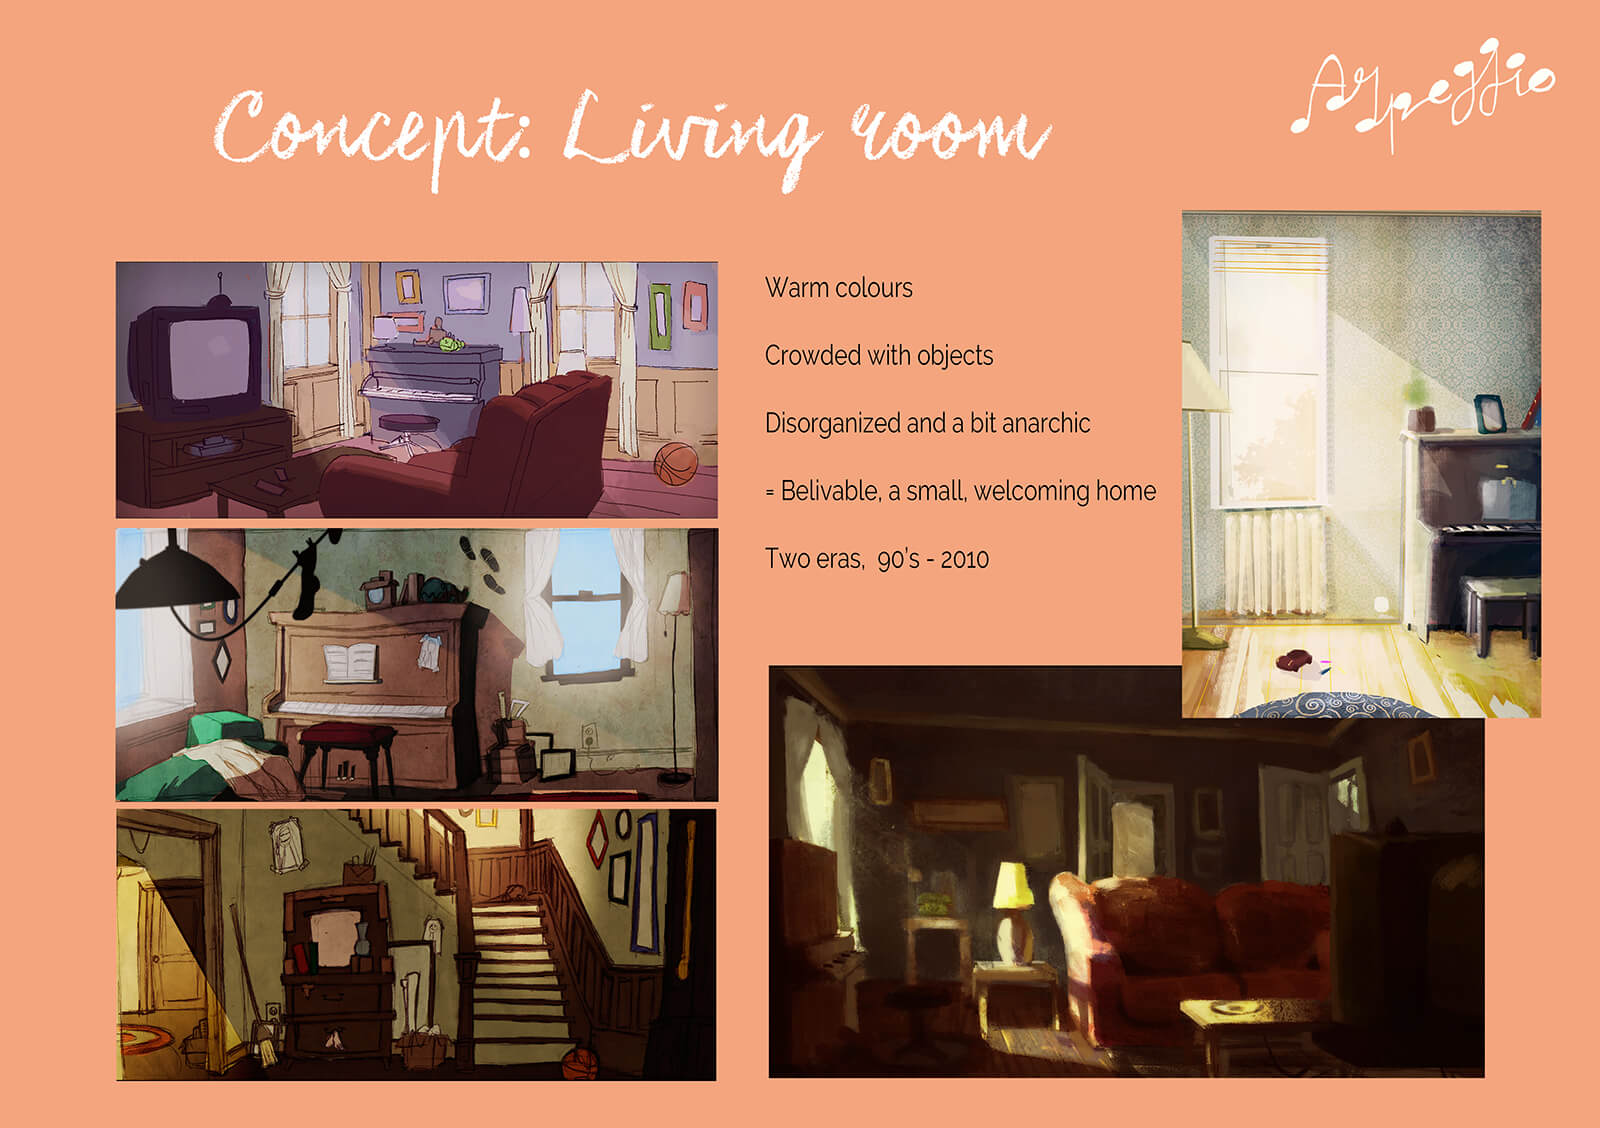 Concept art for the living room depicted in the film Arpeggio, with several color drawings of living rooms with a piano